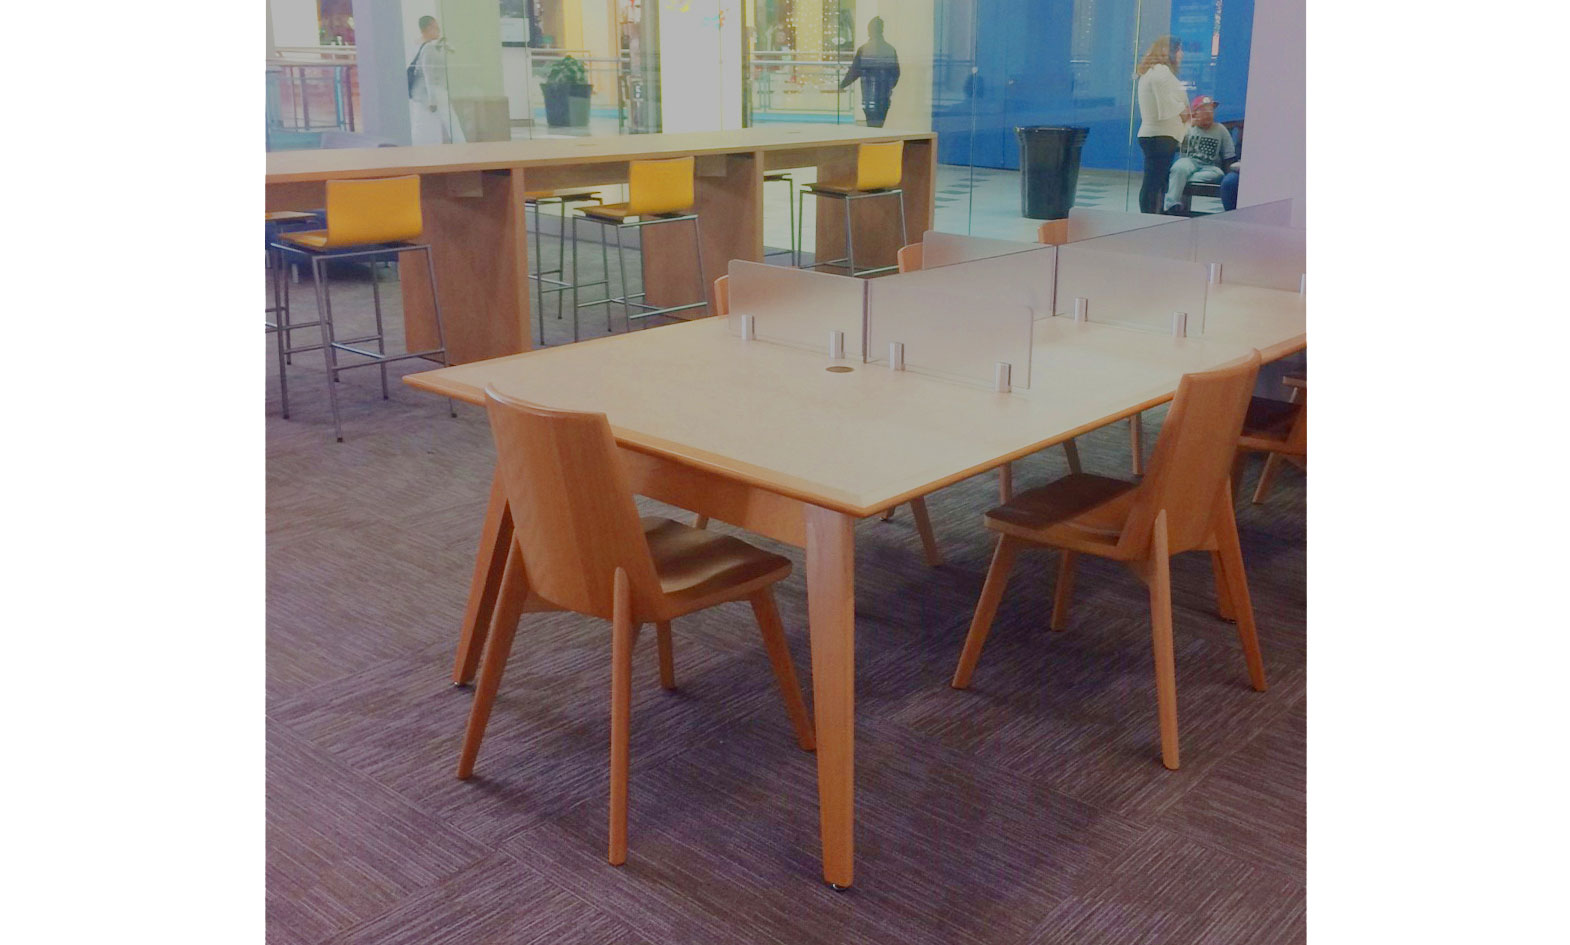 Public Library furniture showing wood tables with wood pull up chairs and frosted acrylic divider panels